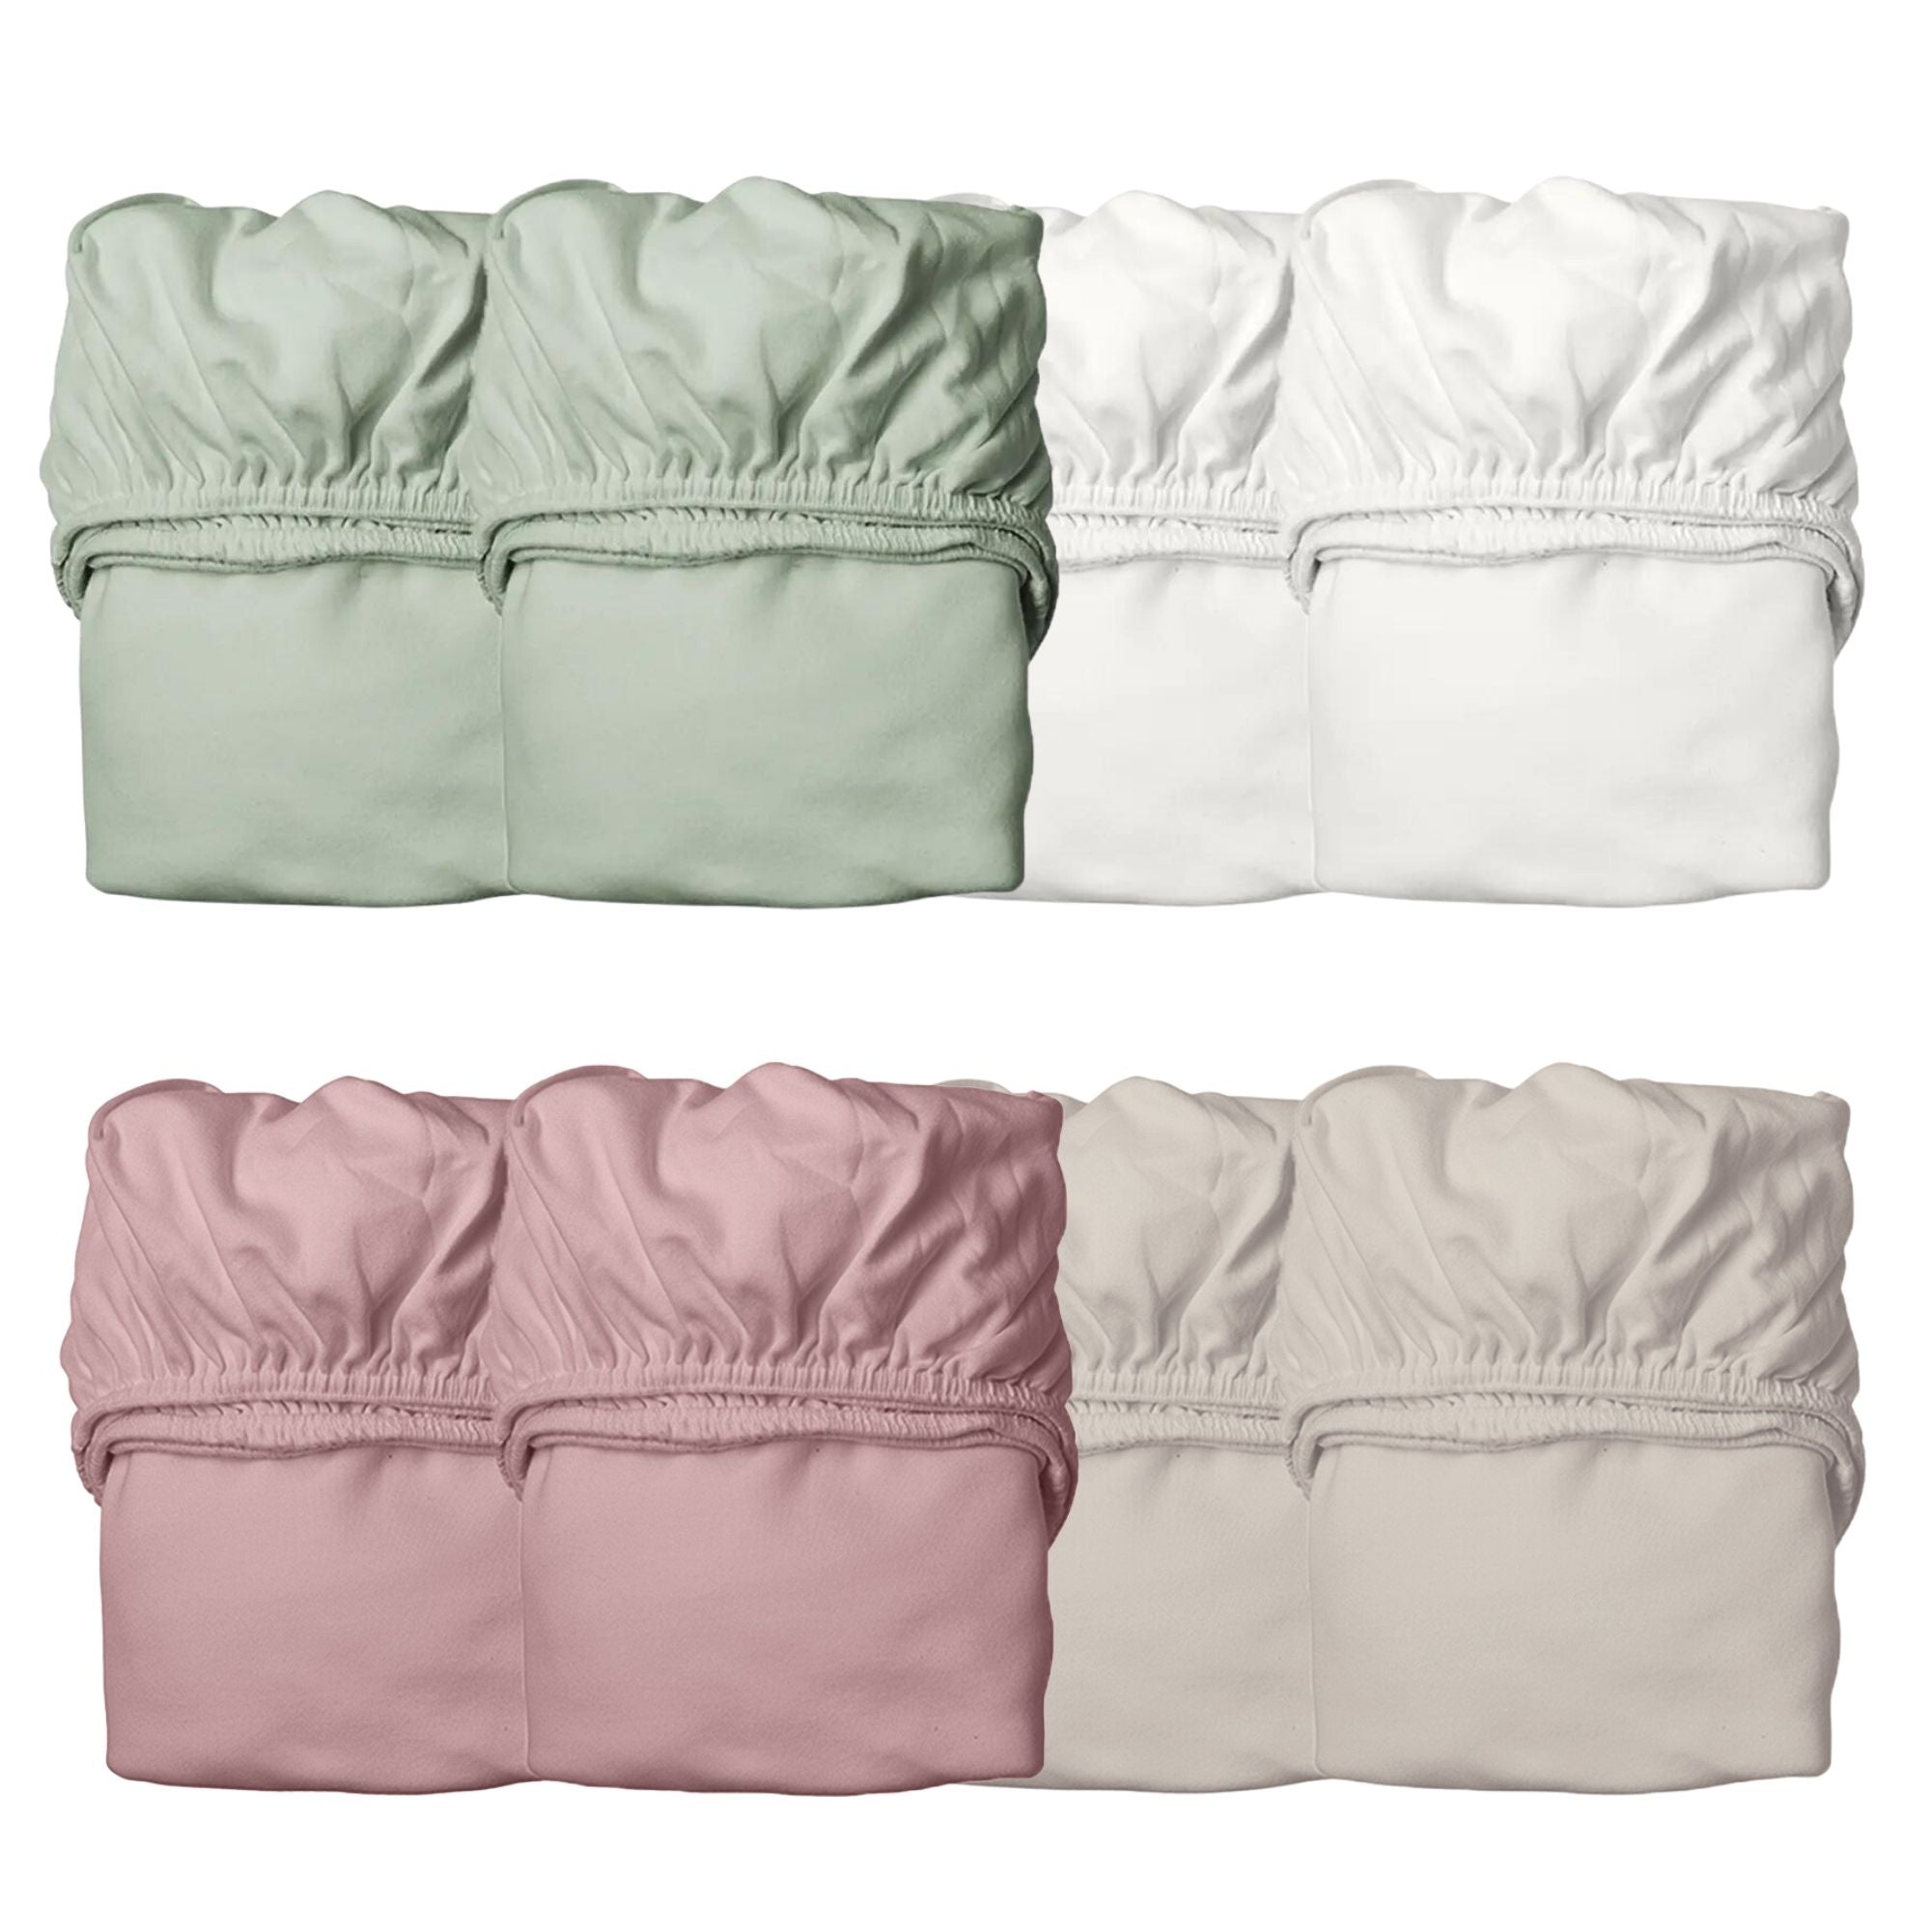 Leander Junior Bed Organic Fitted Sheet Snow Pack (2 Sheets)   140 X 70